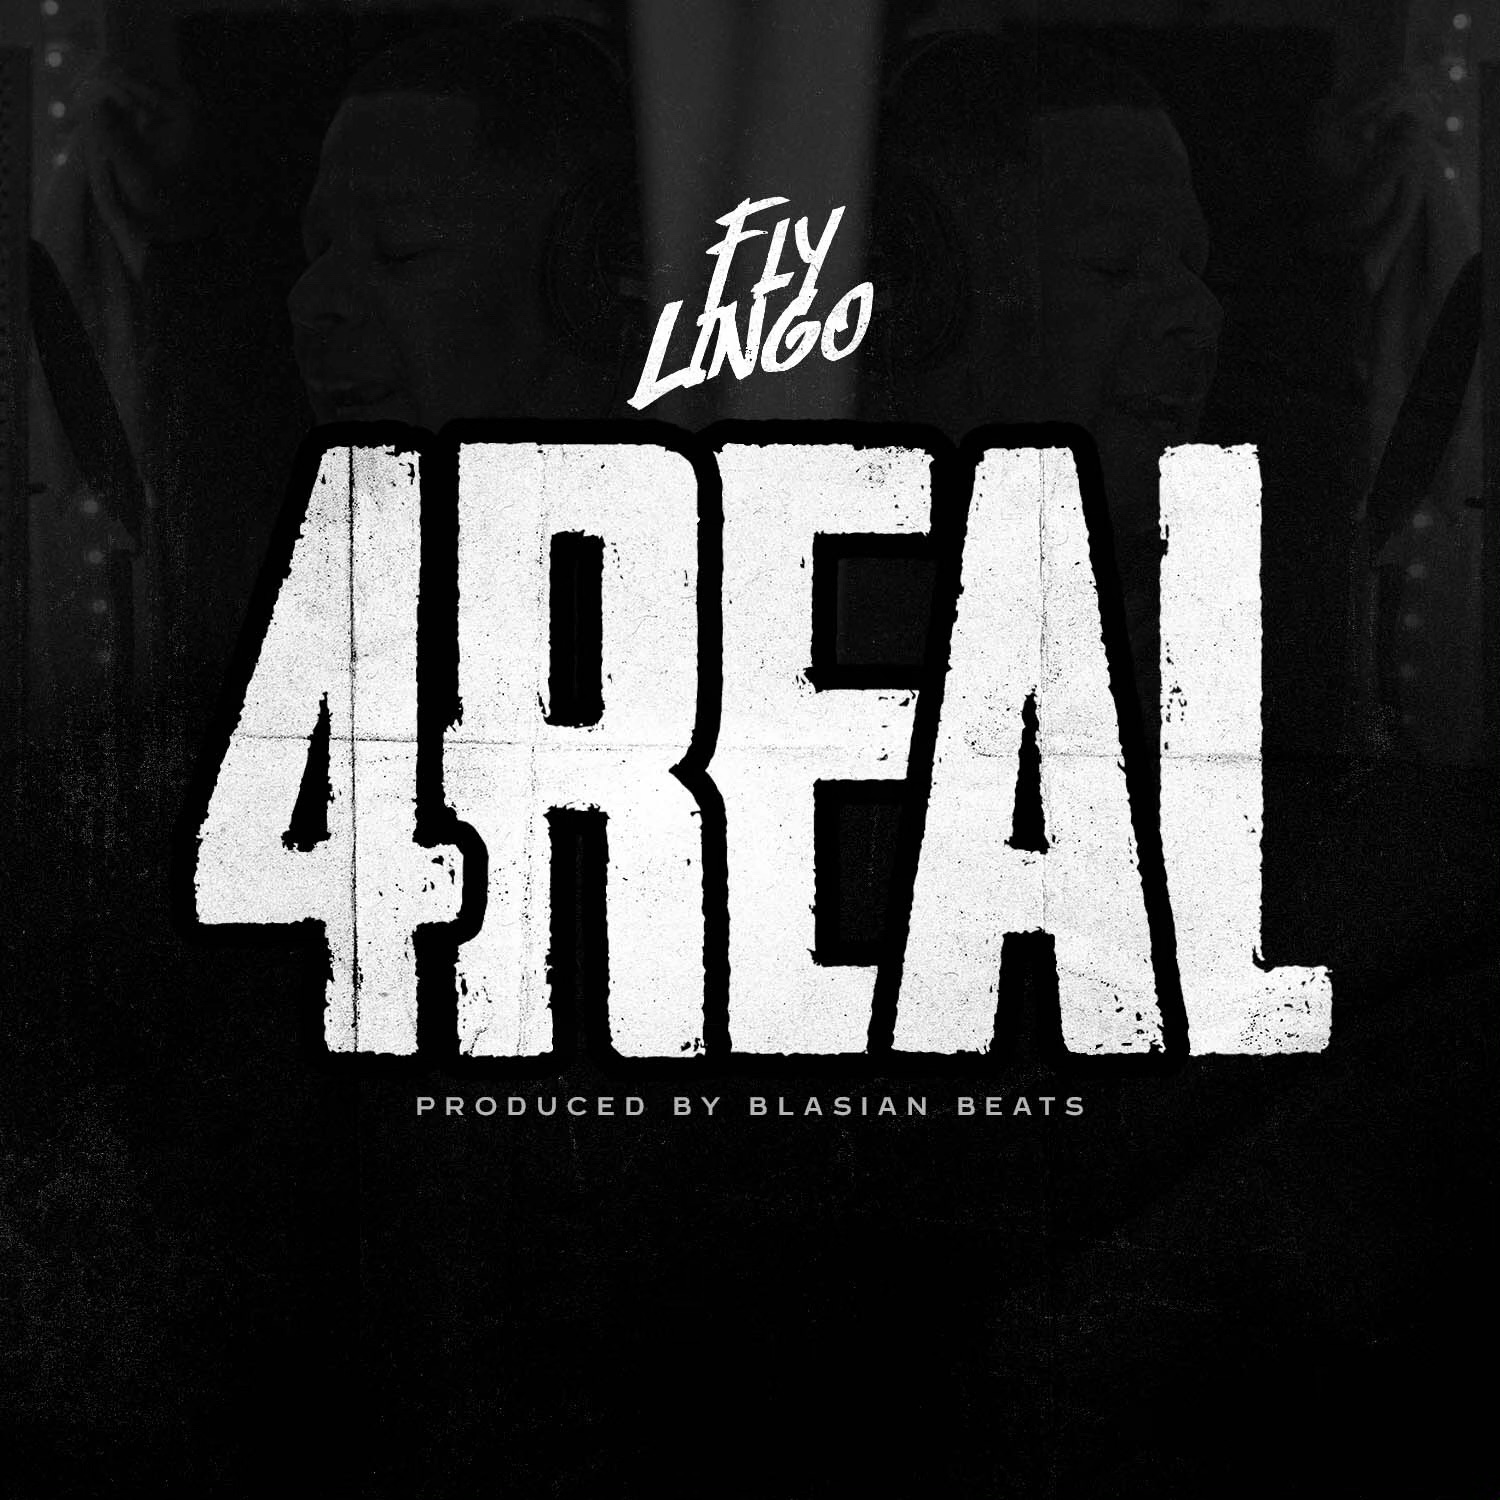 Fly Lingo is back with another banger titled ‘4 Real’ | @flylingo